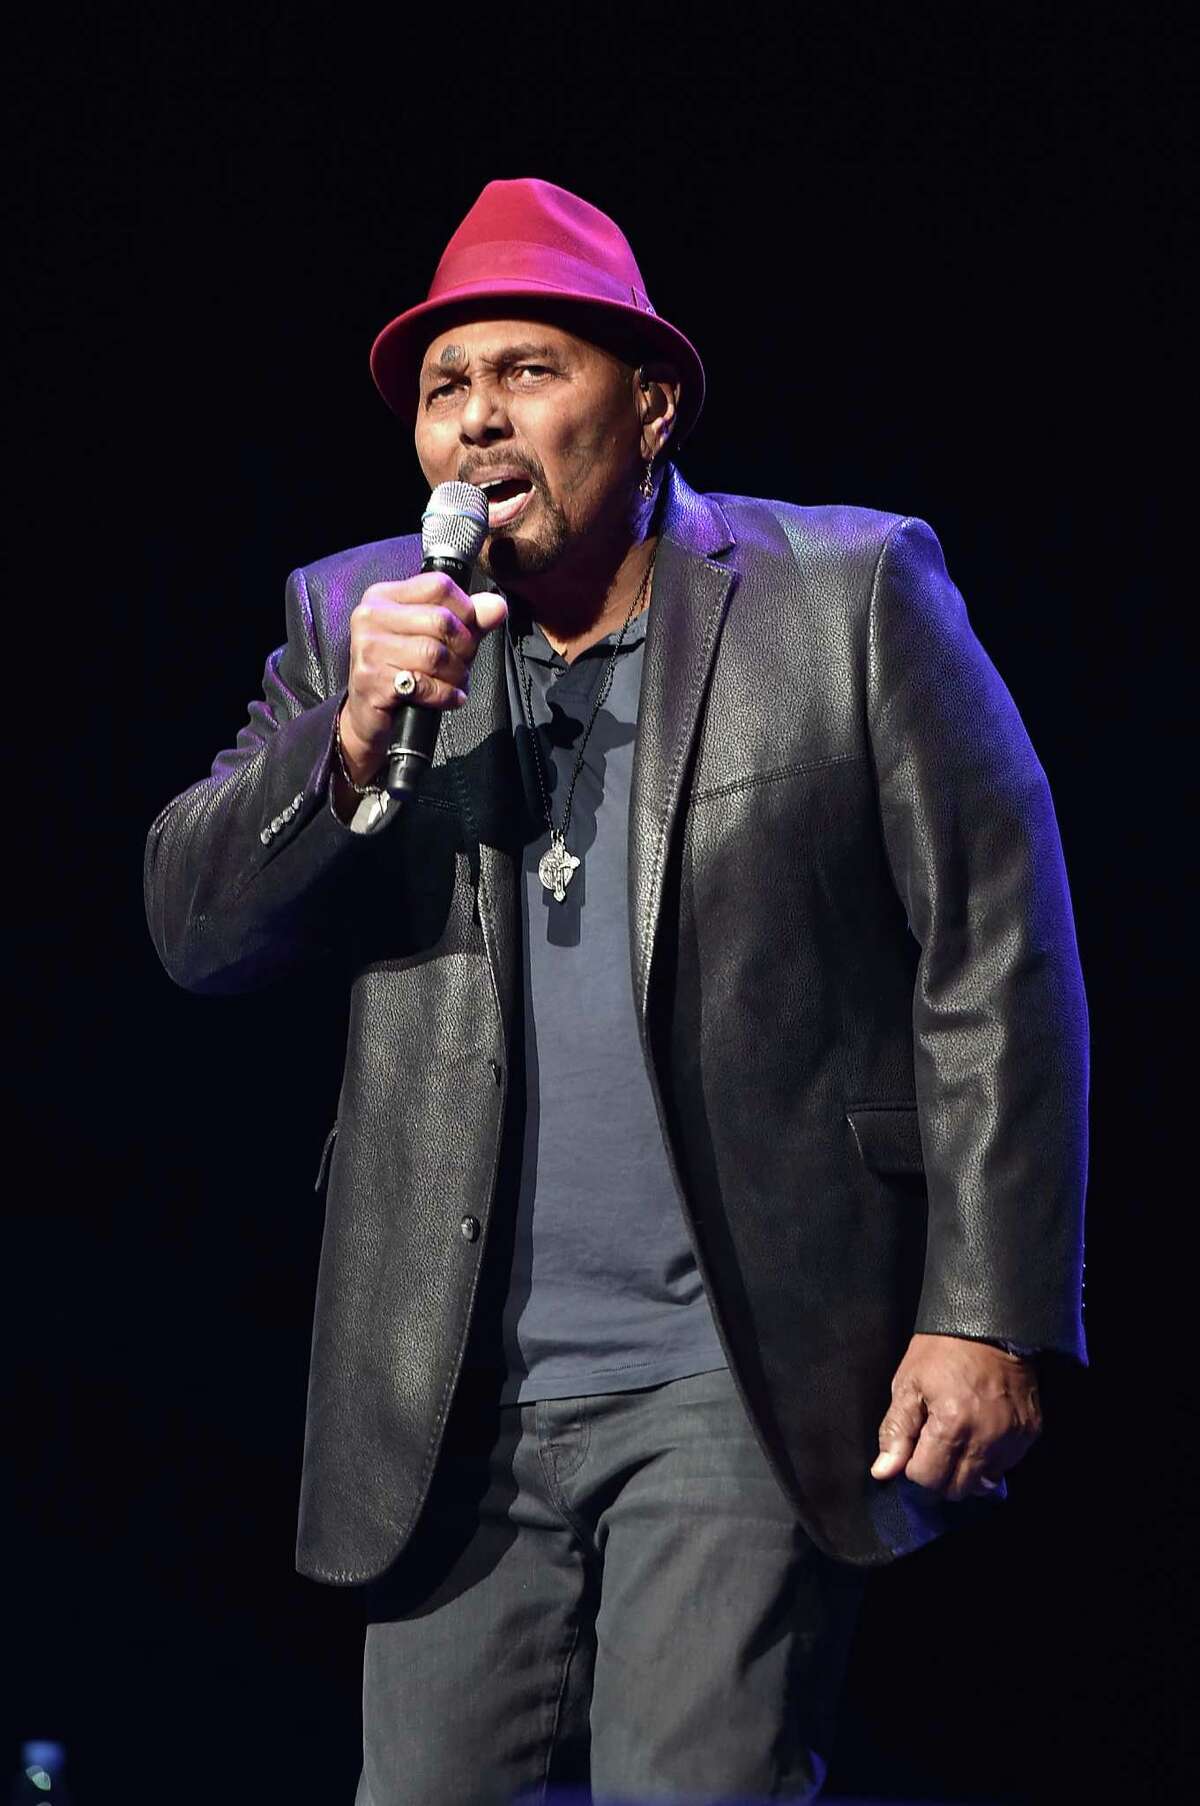 NEW YORK, NY - JANUARY 06: Aaron Neville performs during "A Concert For Island Relief" at Radio City Music Hall on January 6, 2018 in New York City. (Photo by Theo Wargo/Getty Images)